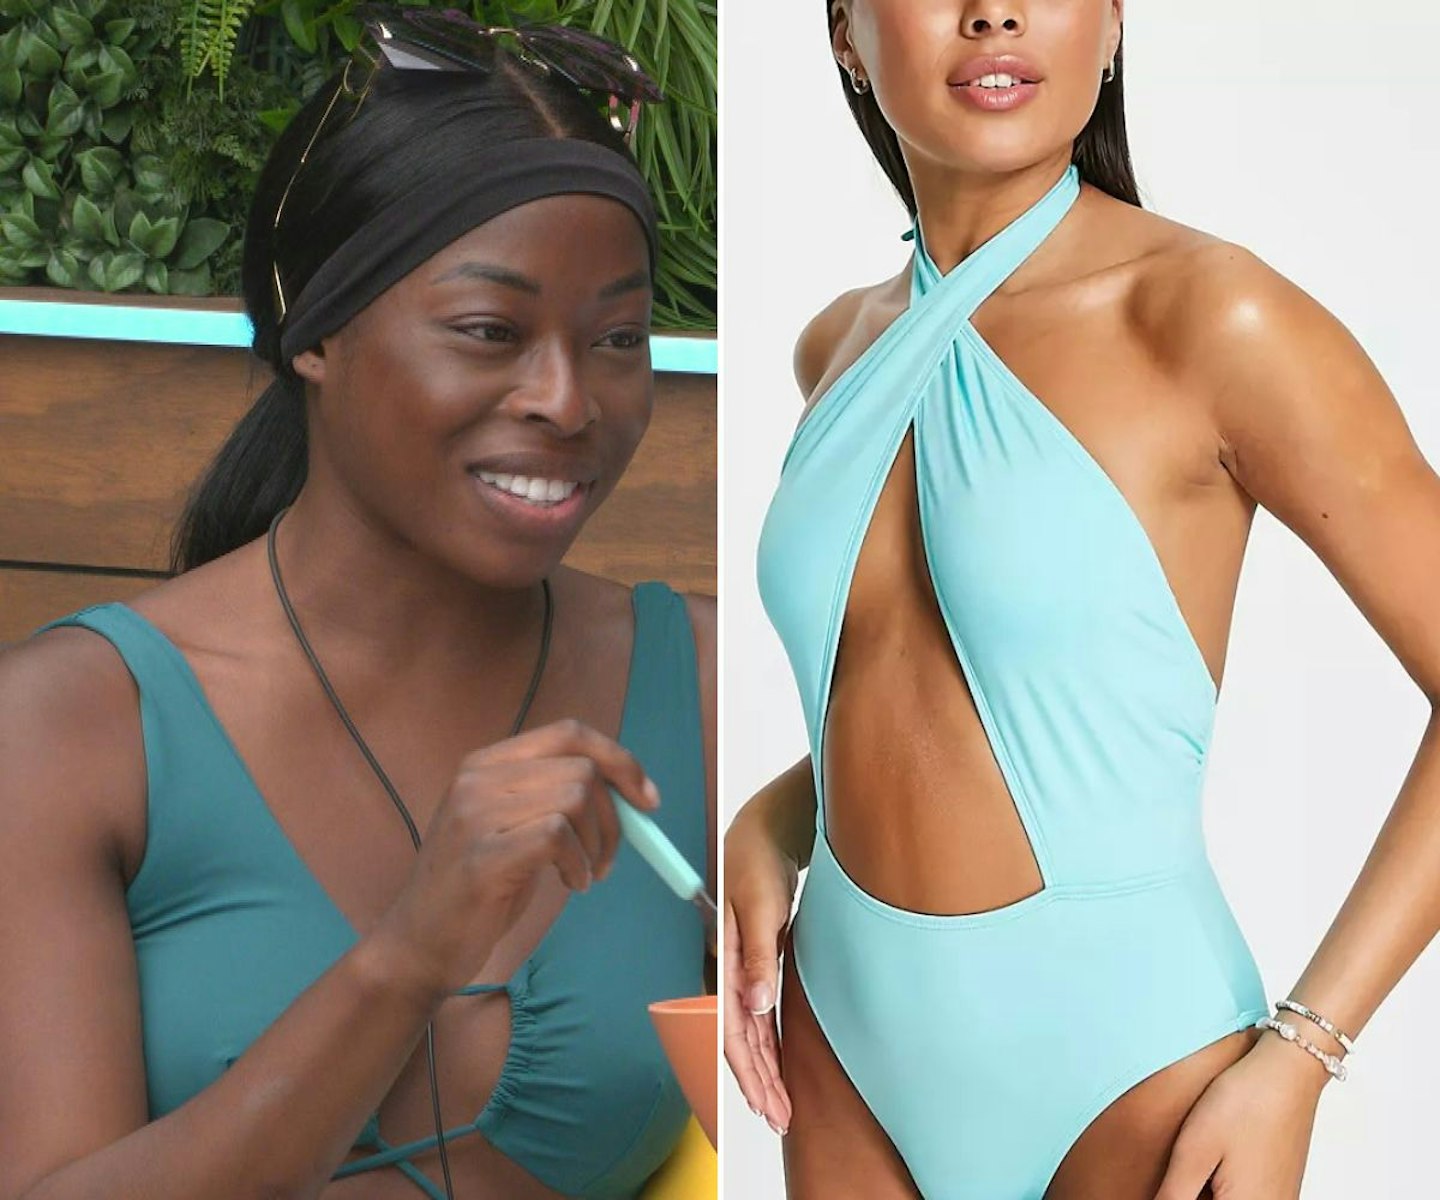 Catherine's teal cut out swimsuit